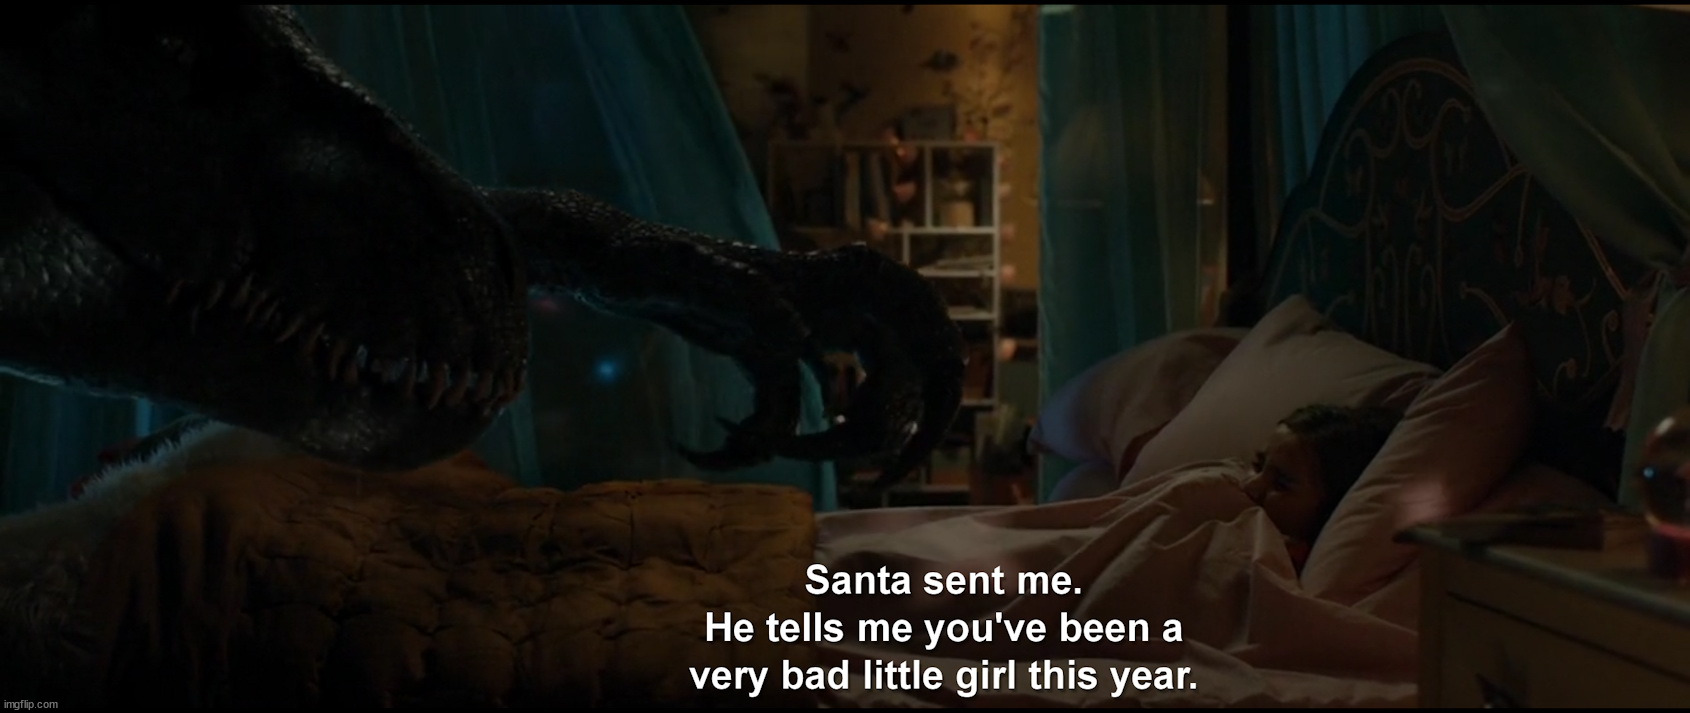 Scary Christmas | image tagged in santa naughty list,bad girl | made w/ Imgflip meme maker